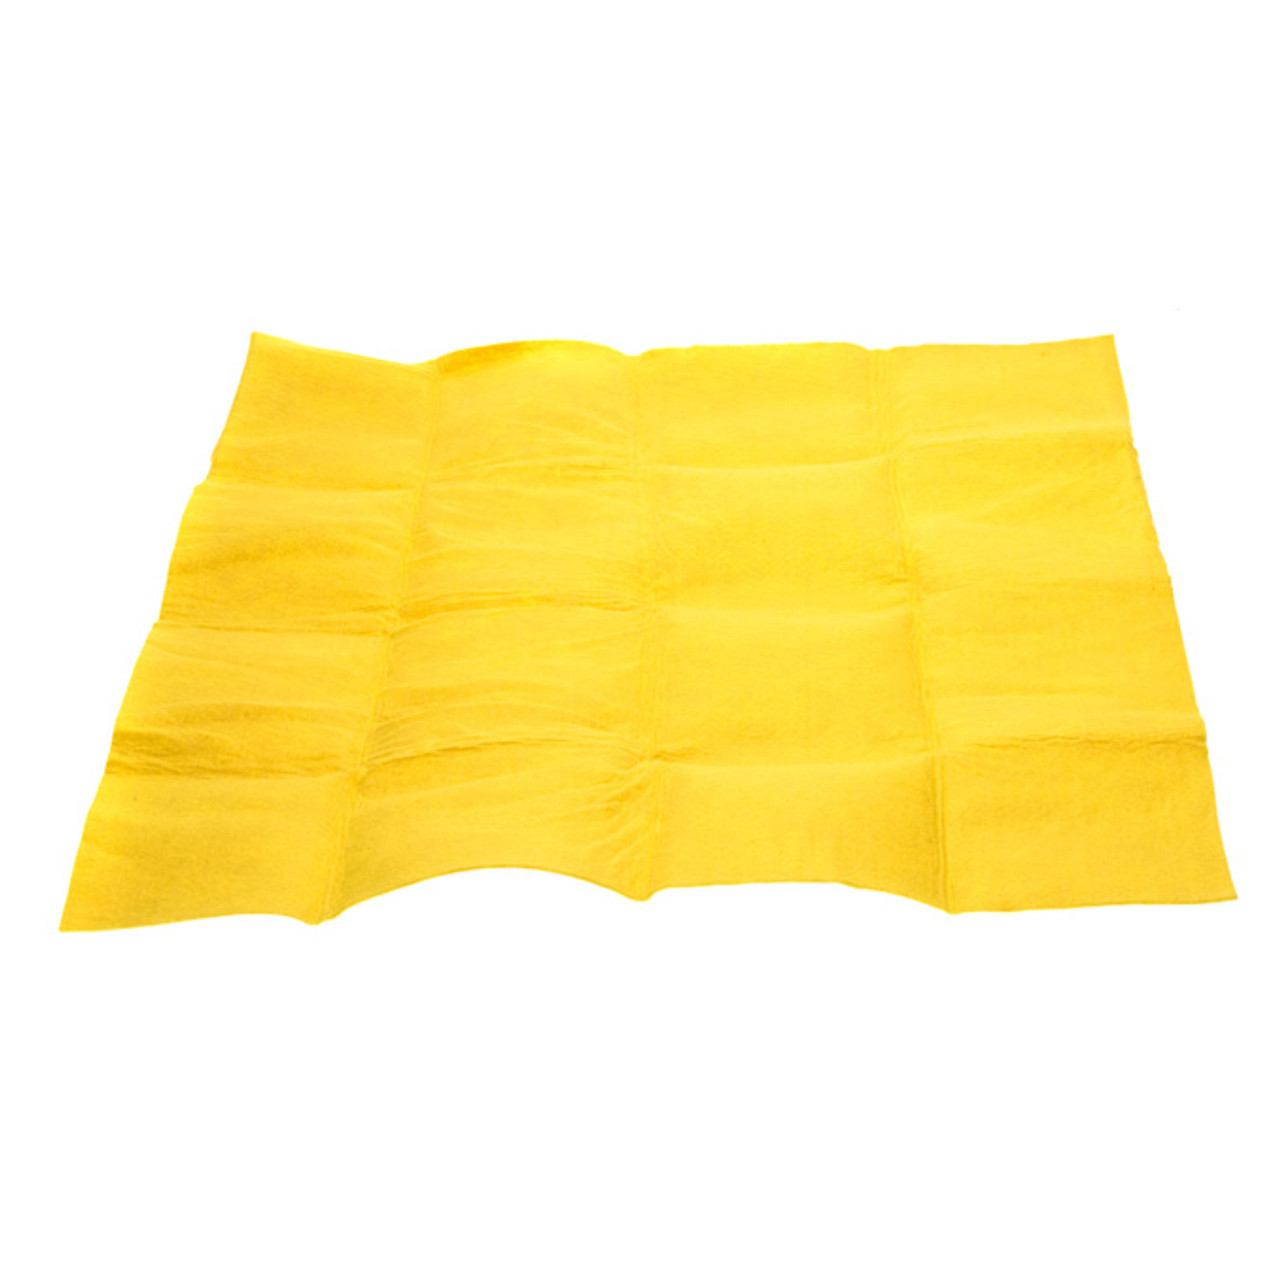 20 x 24 Camp Towel - Yellow, Non Woven, Super Absorbent Material -  Camping Tools Supplies